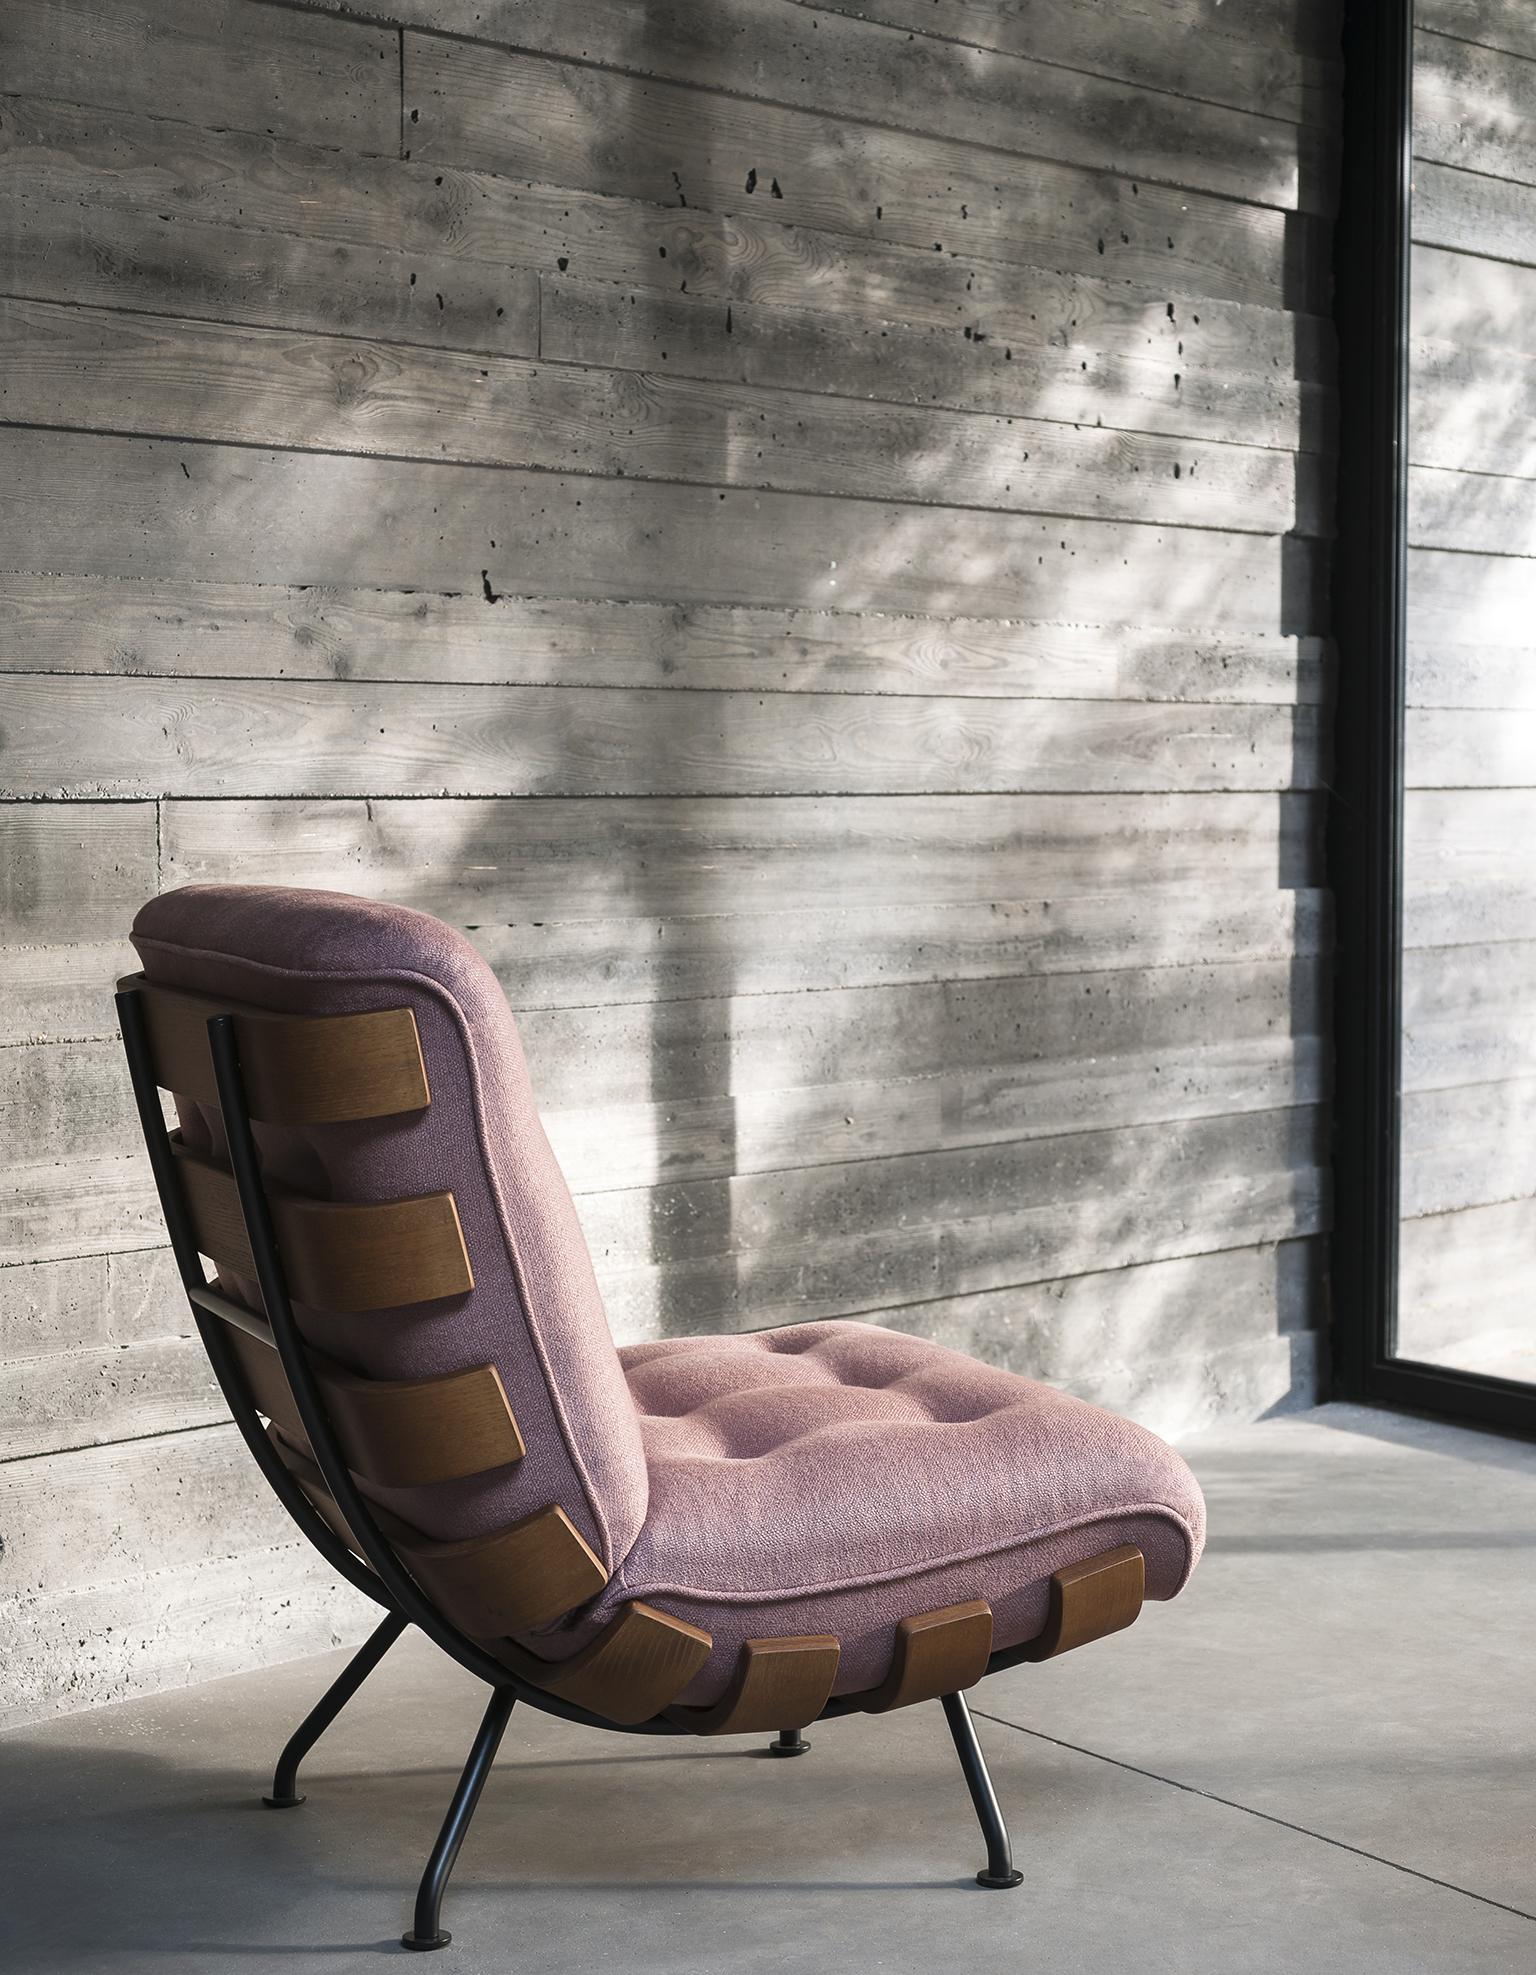 Tacchini is delighted to reissue Costela by Martin Eisler, icon of Brazilian 1950s design. An elegant yet informal armchair. With its sensual aesthetic, natural materials and intelligent design, it offers sophisticated personalization. Costela is a